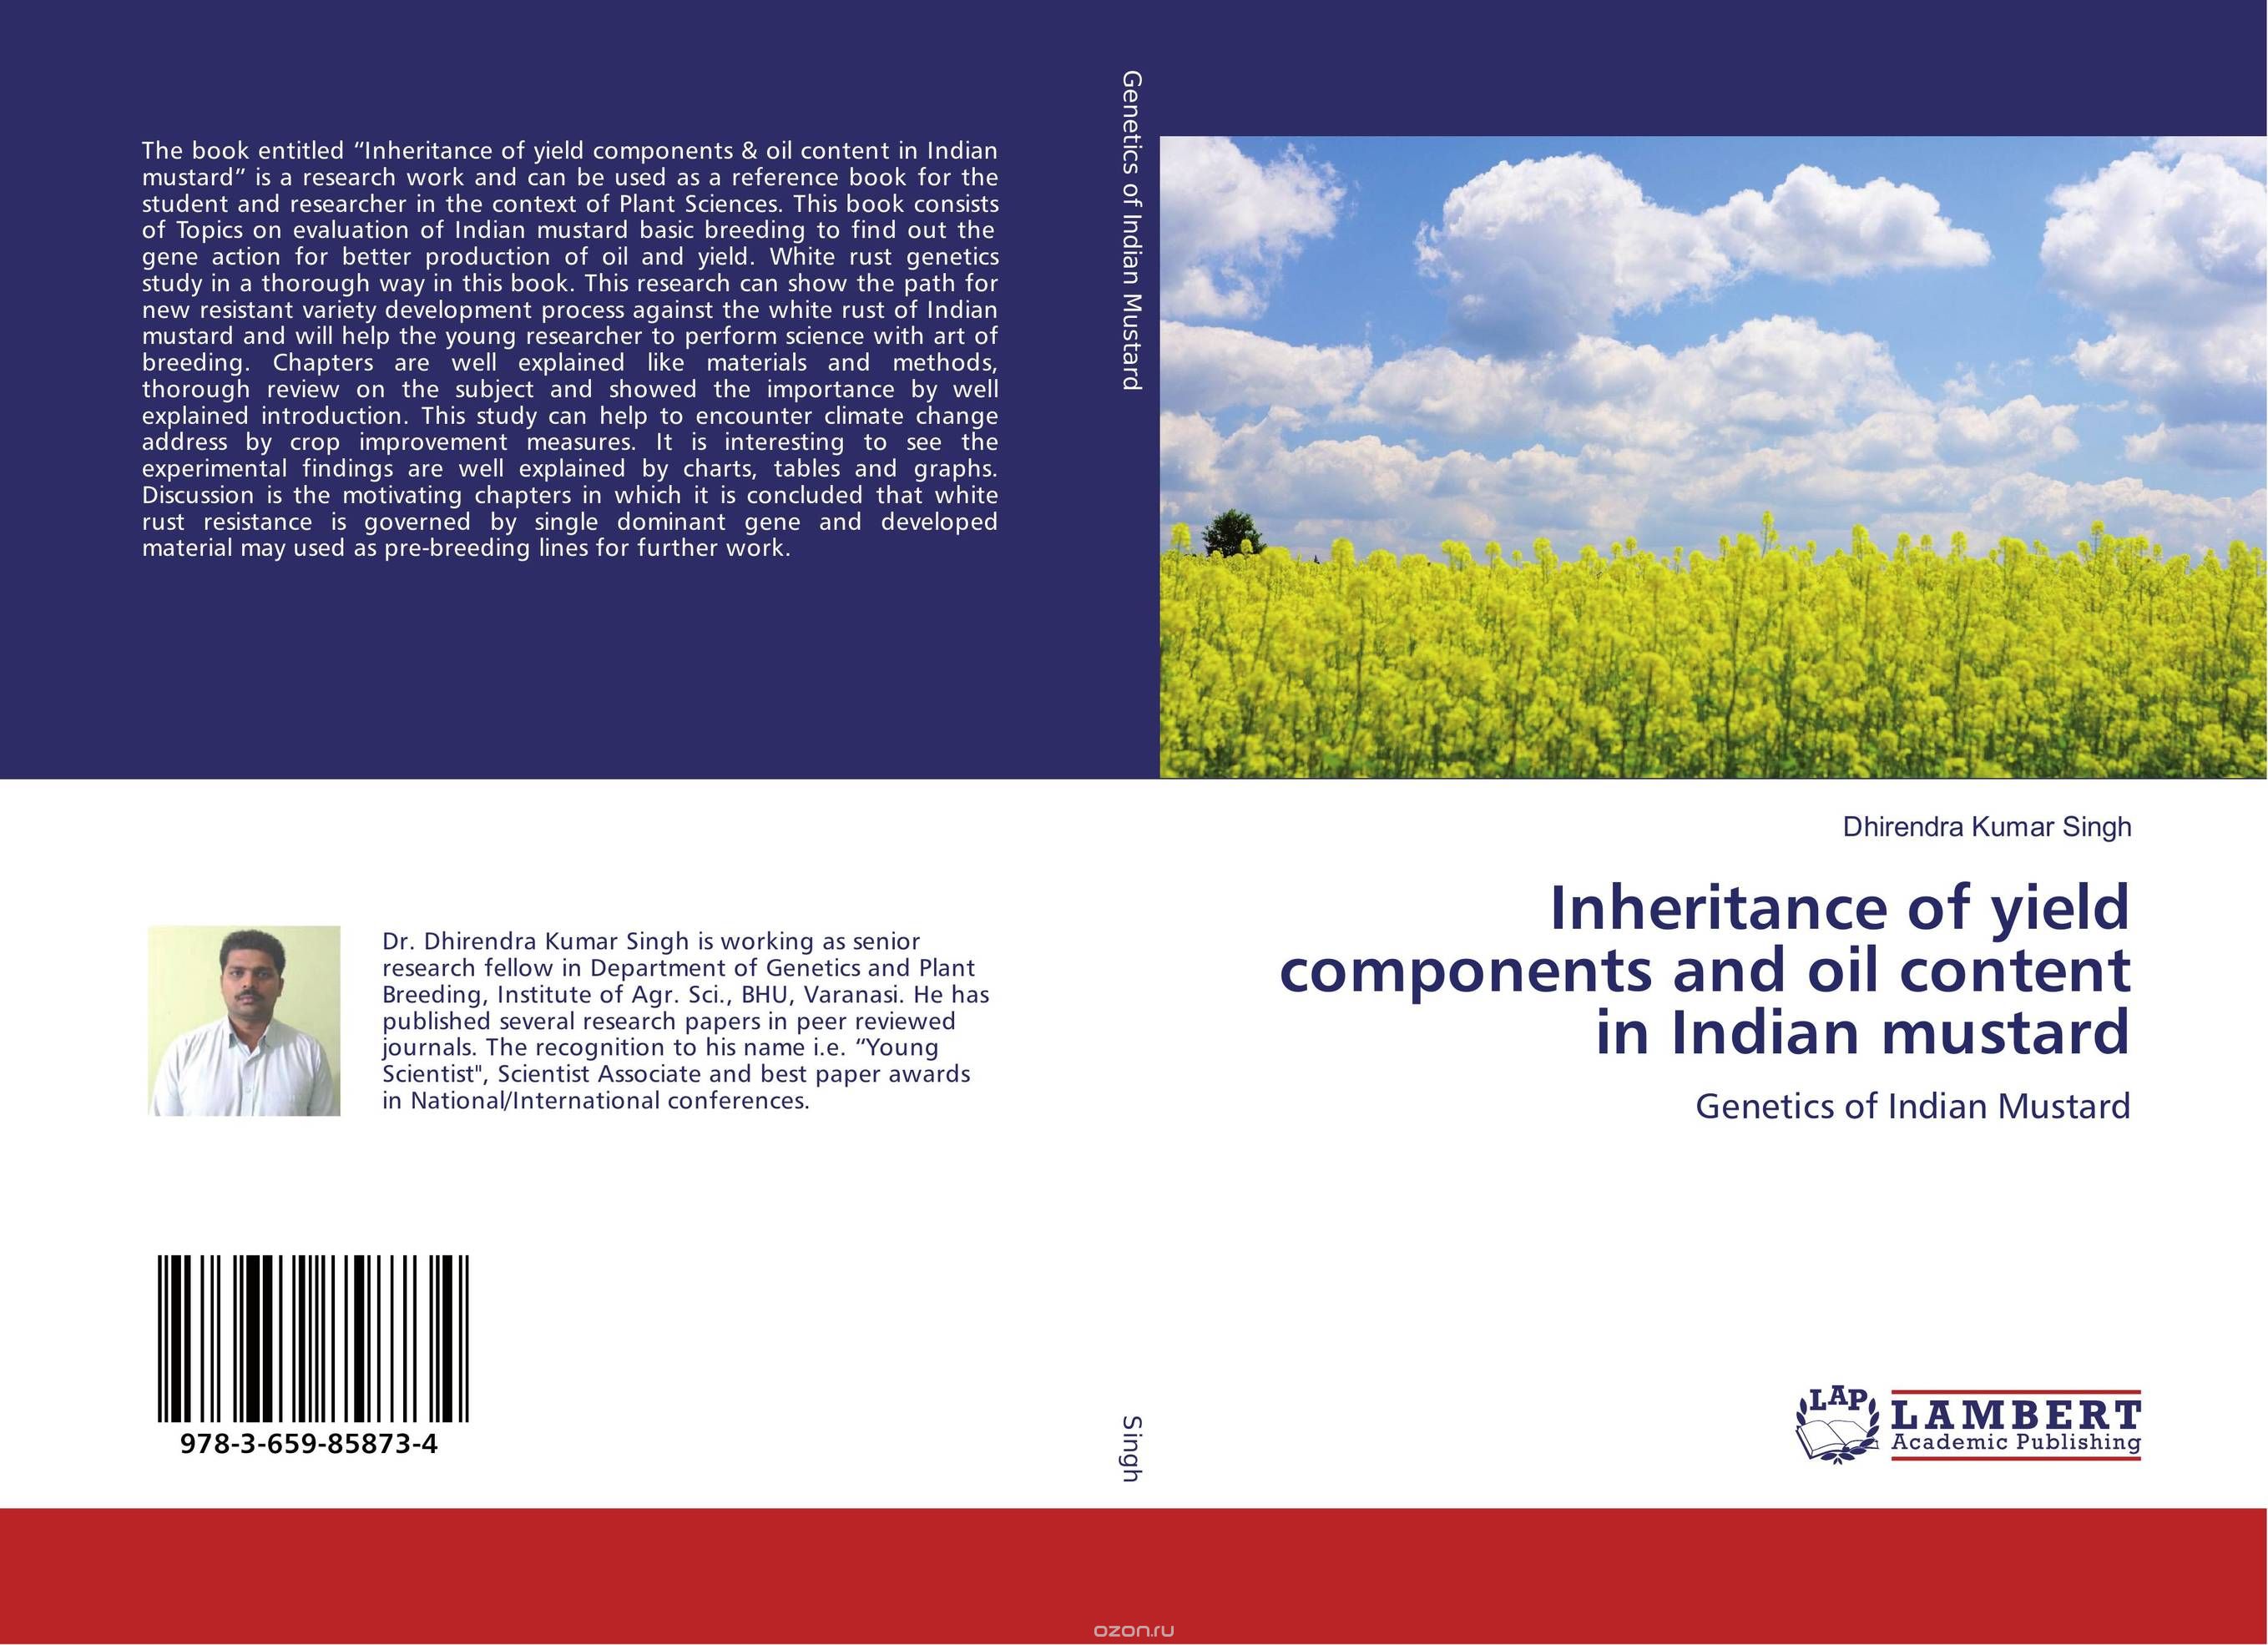 Скачать книгу "Inheritance of yield components and oil content in Indian mustard"